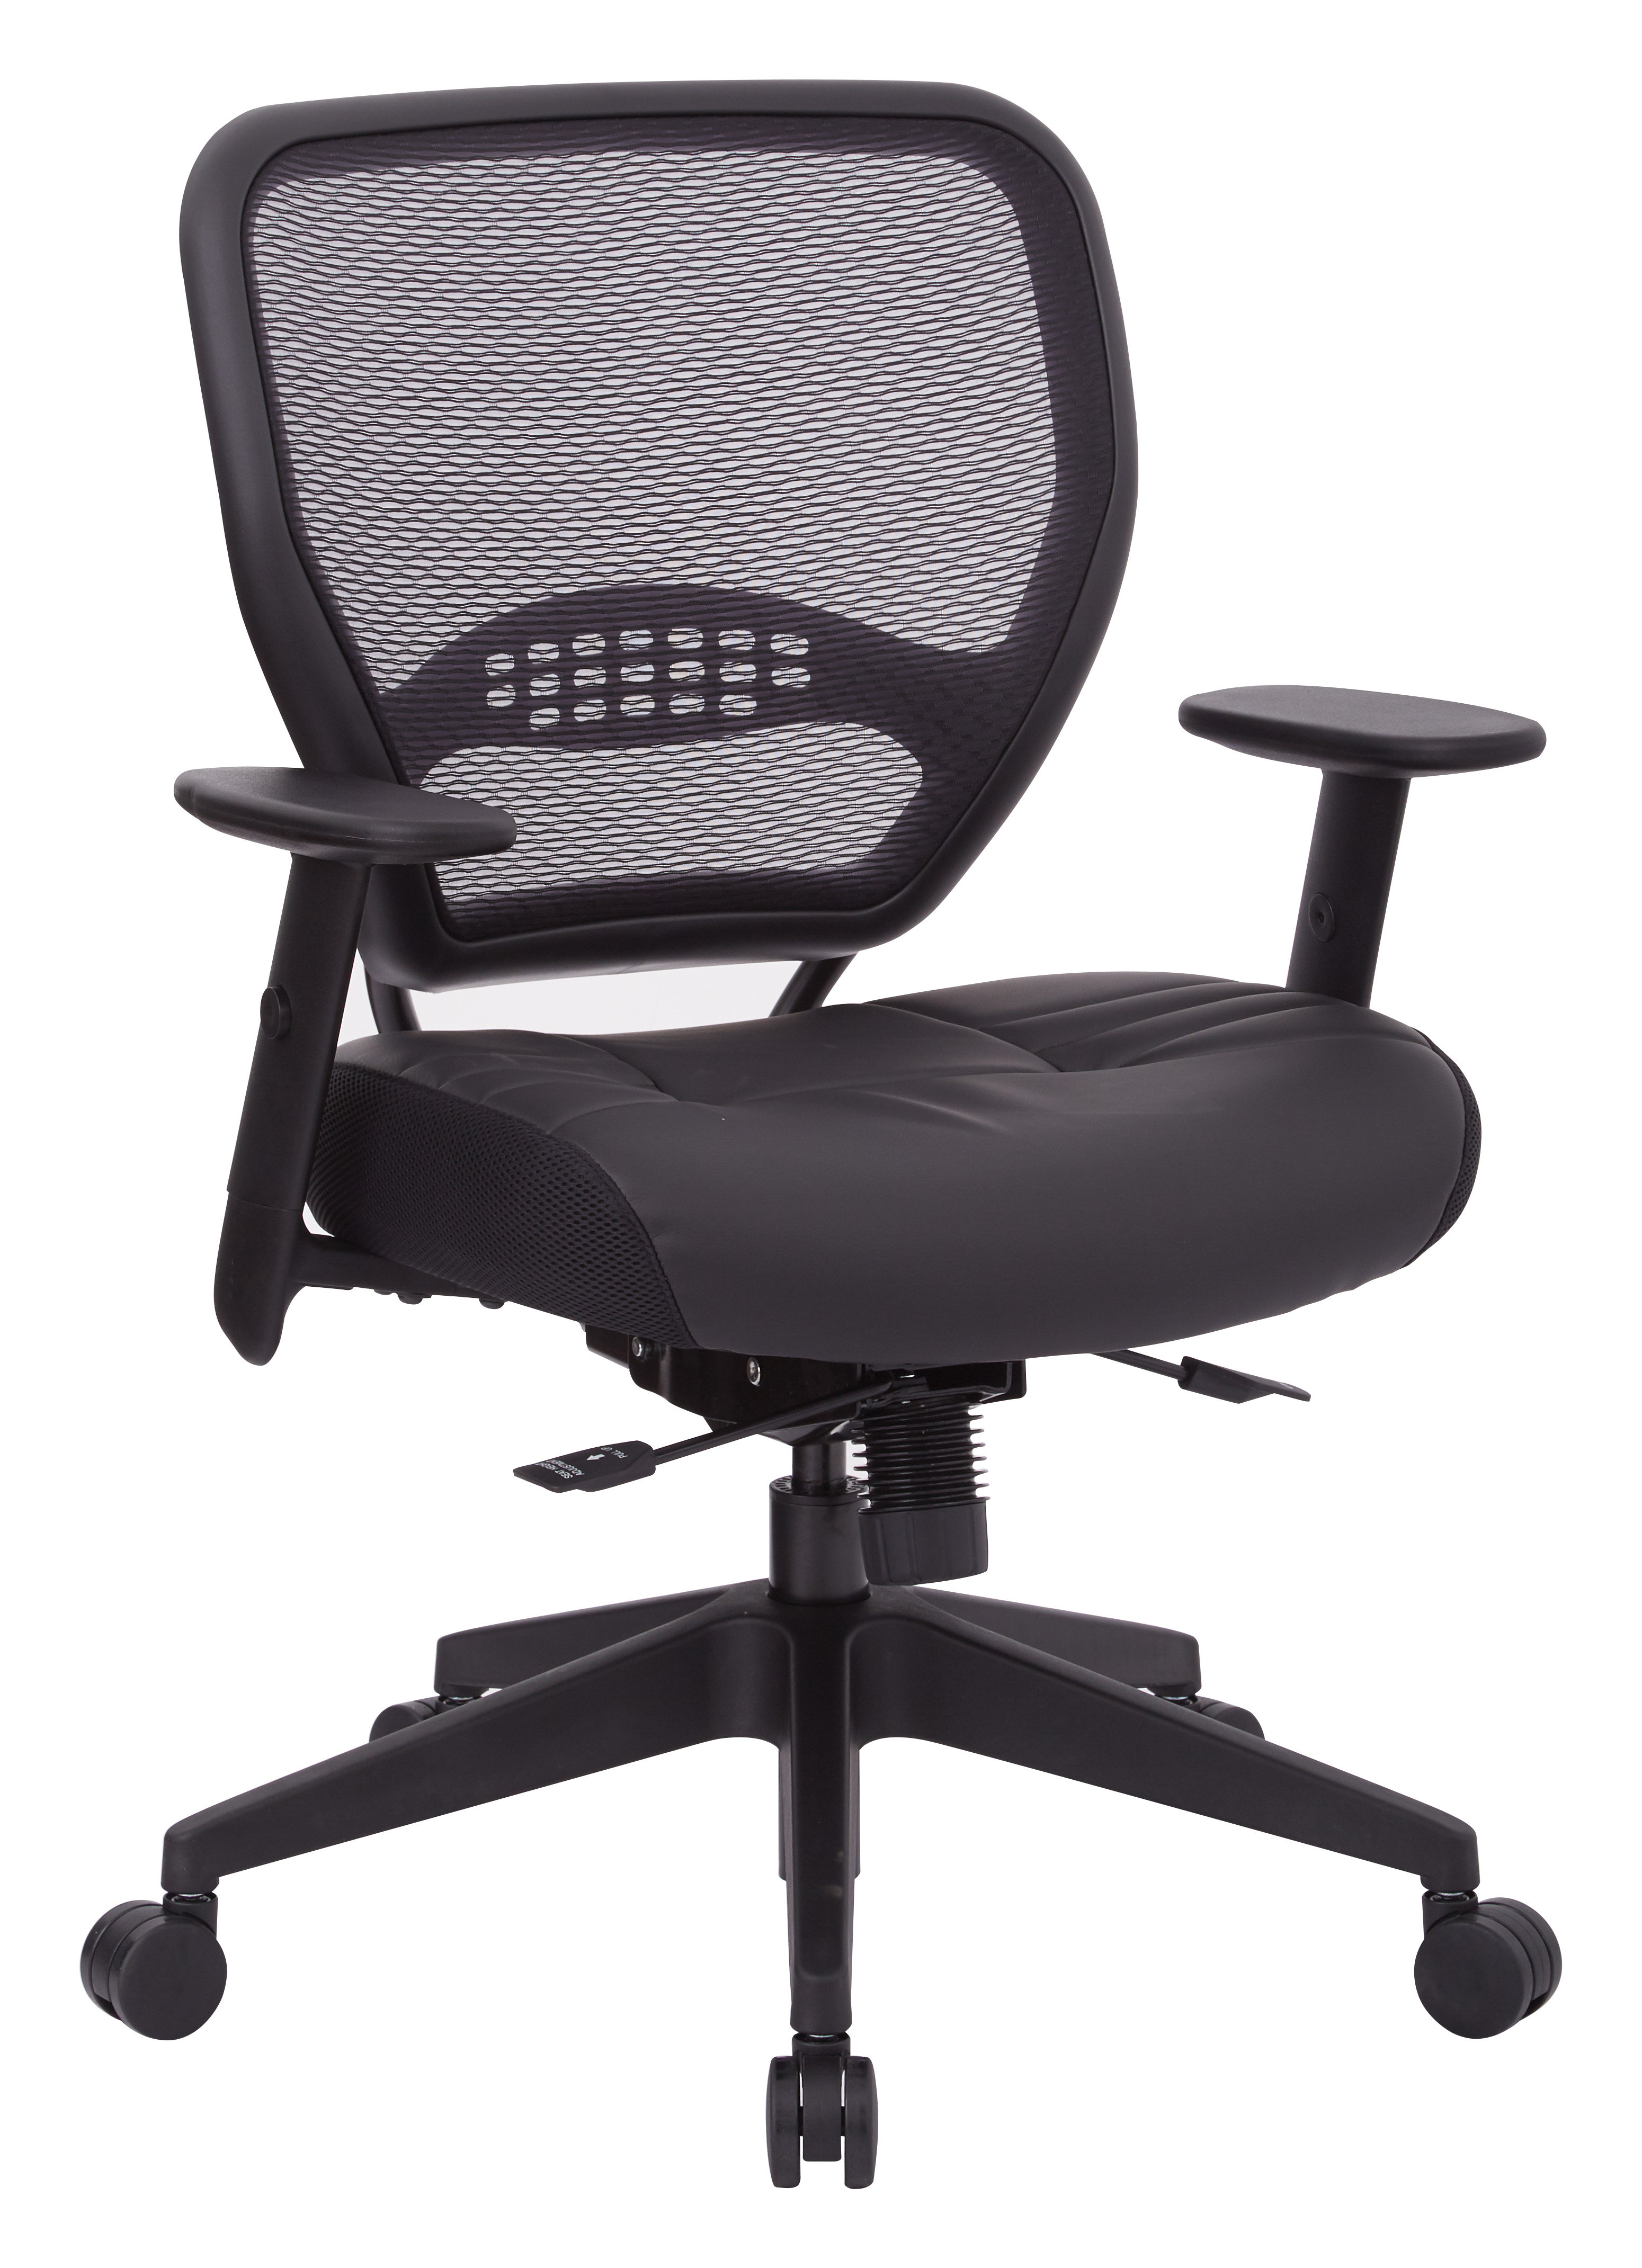 Nylong Base Adjustable High Back Managers Chair 2-to-1 Synchro Tilt Control Black SPACE Seating AirGrid Back and Padded Bonded Leather Seat Adjustable Arms 